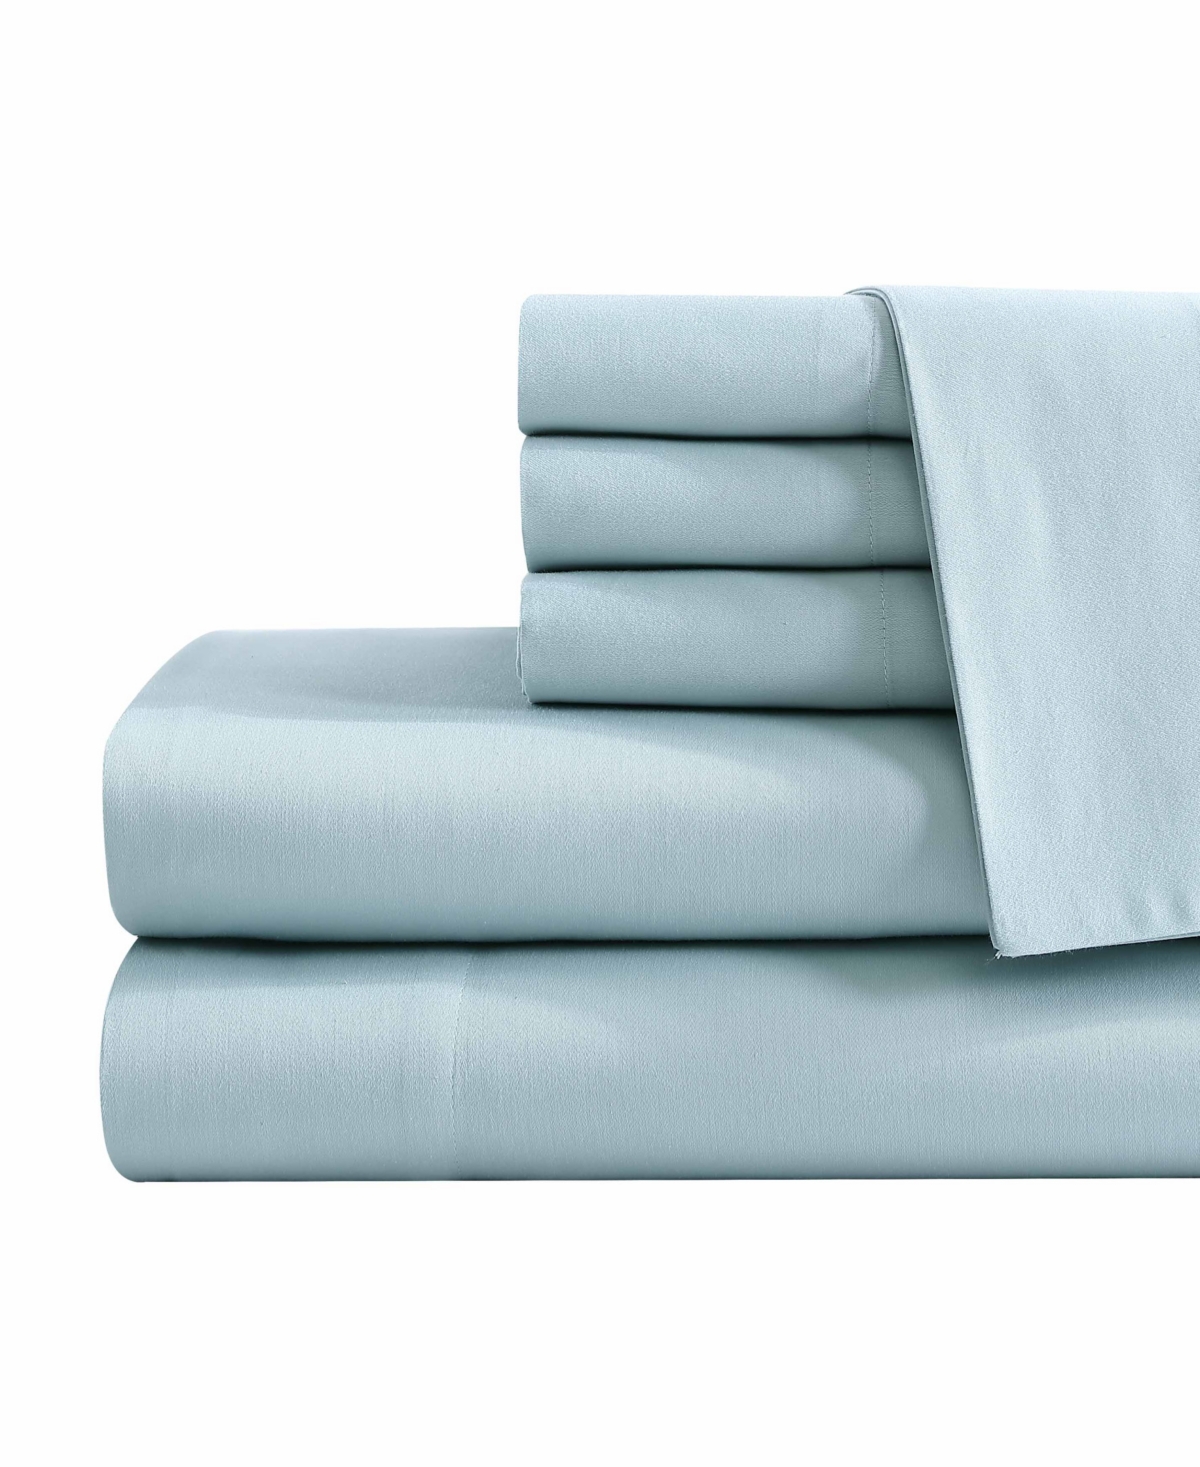 Tommy Bahama Home Solid 1000-thread Count Cotton Blend Sateen 6 Piece Sheet Set, Queen In Ocean Green